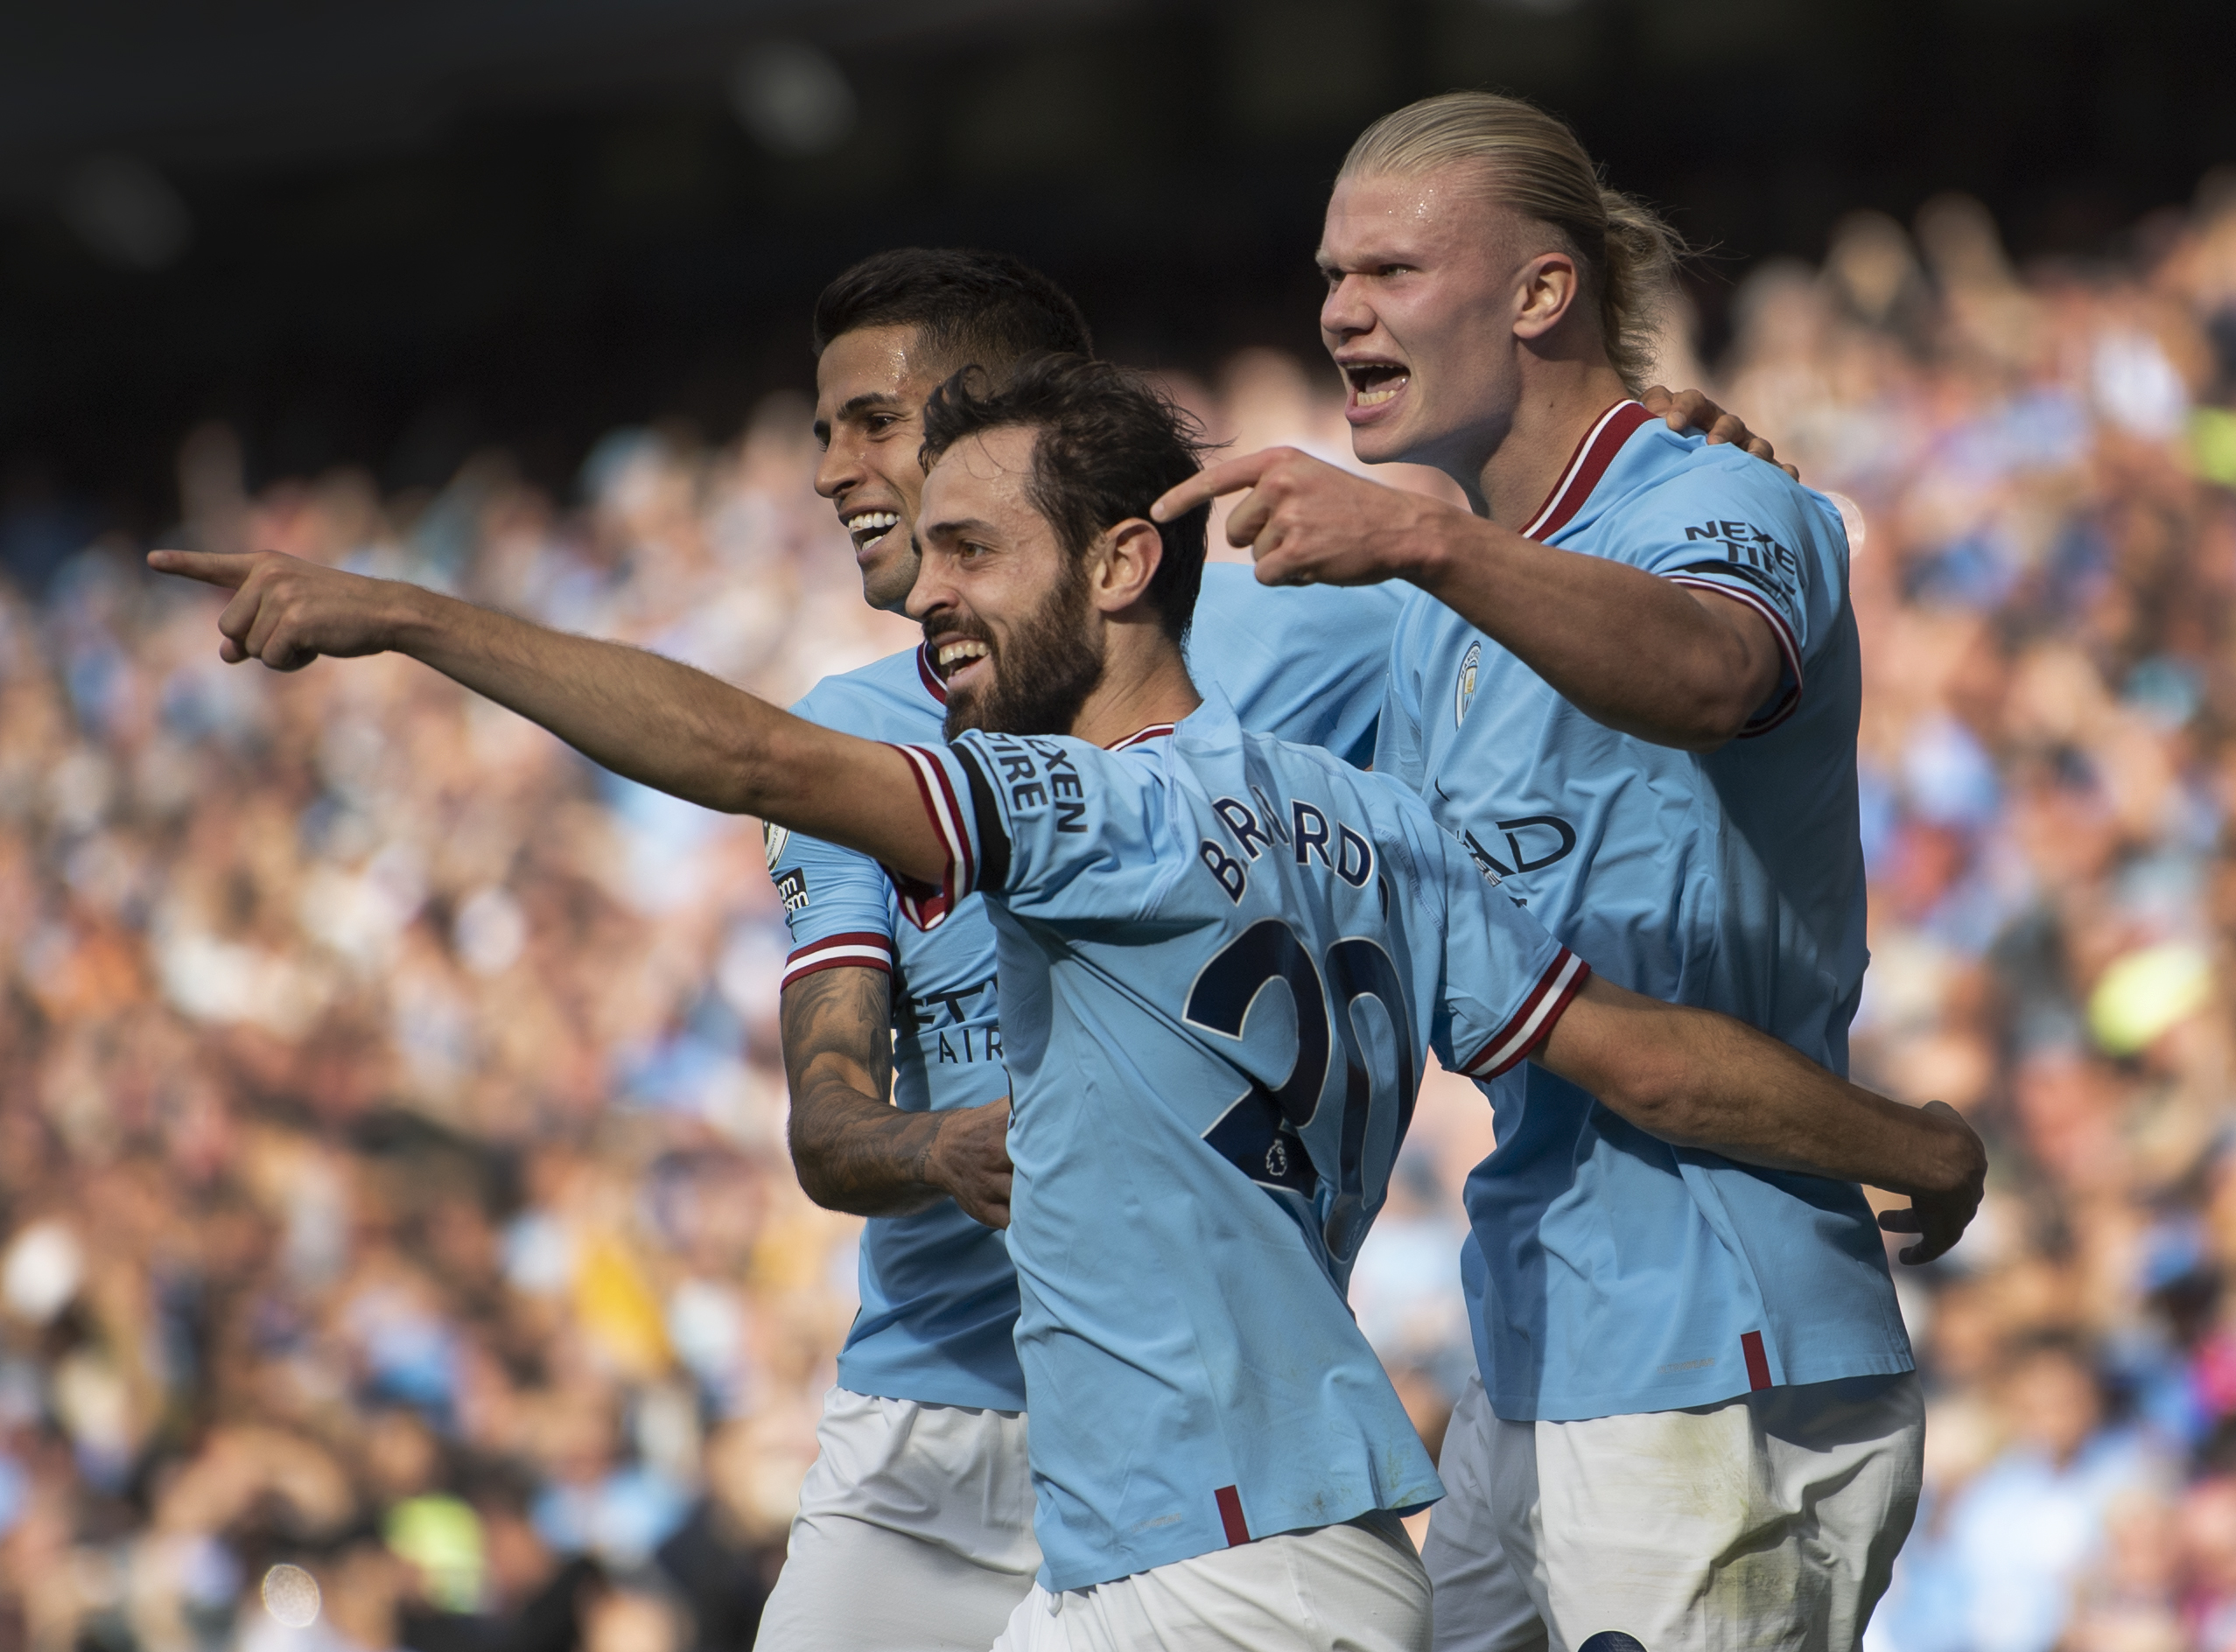 Erling Haaland of Manchester City celebrates scoring his second goal of a hat trick with teammates Joao Cancelo and Bernardo Silva.